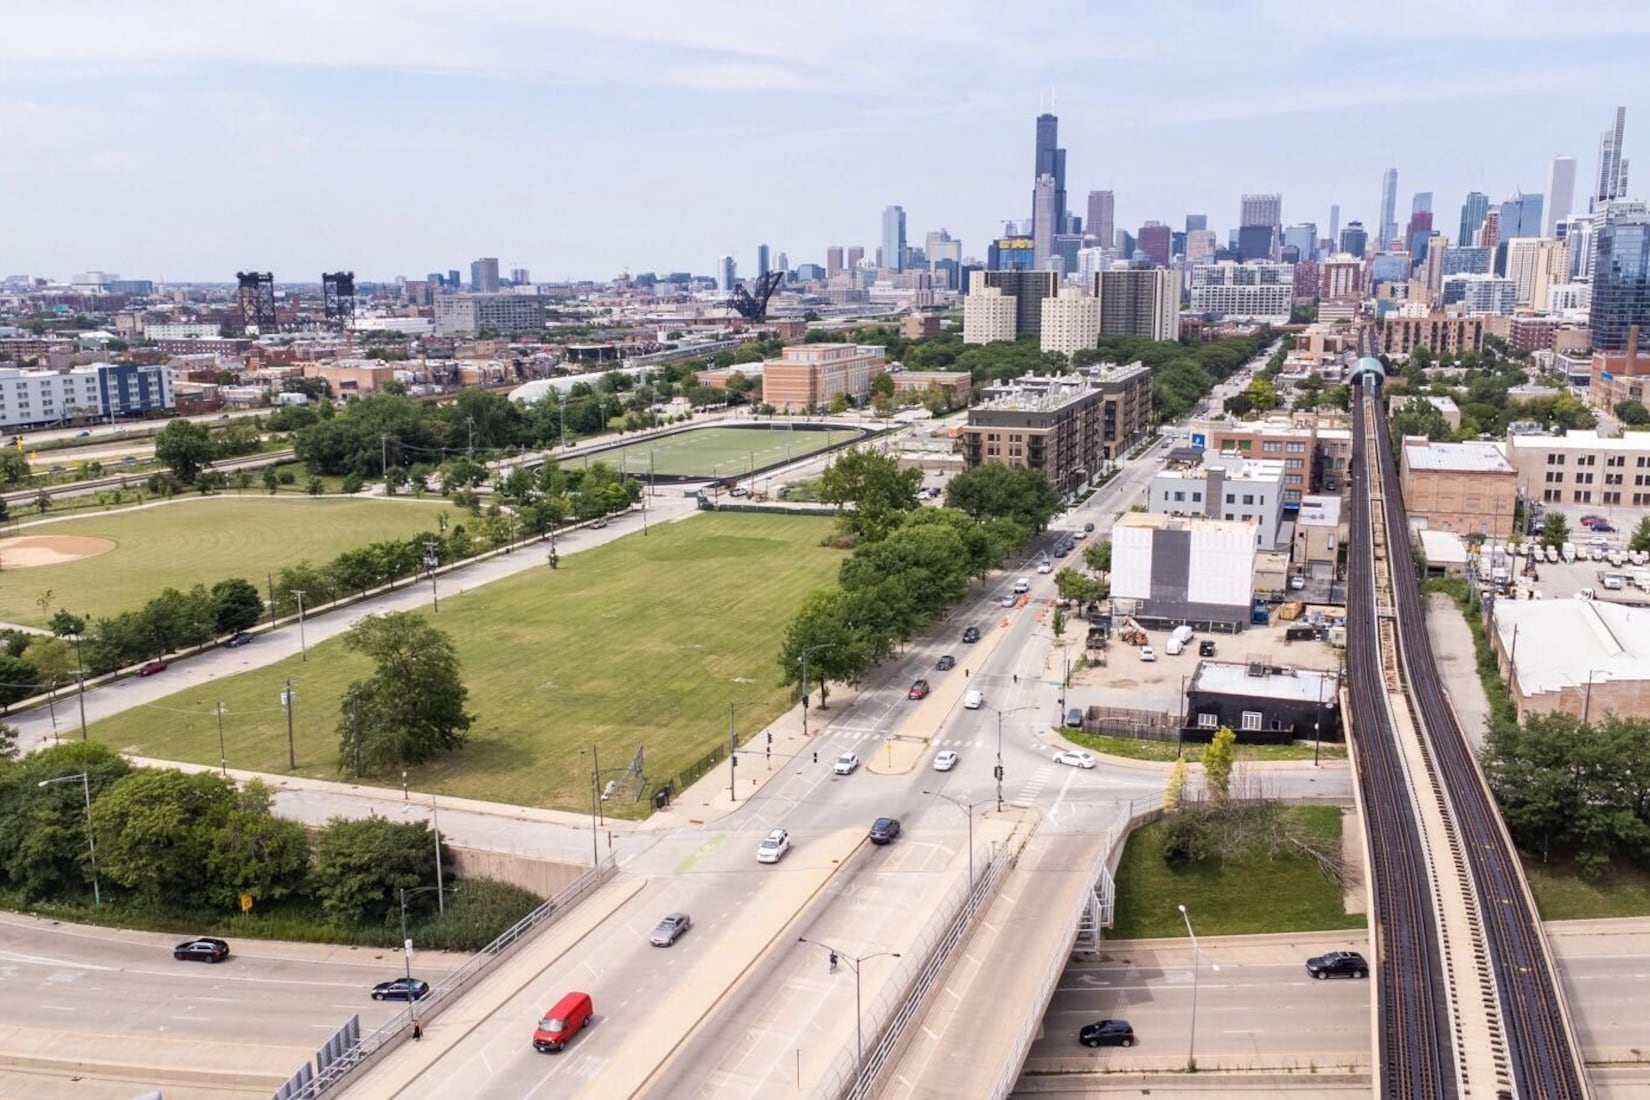 Overhead view of vacant lot with highways and roads in the foreground and the Chicago skyline in the background.